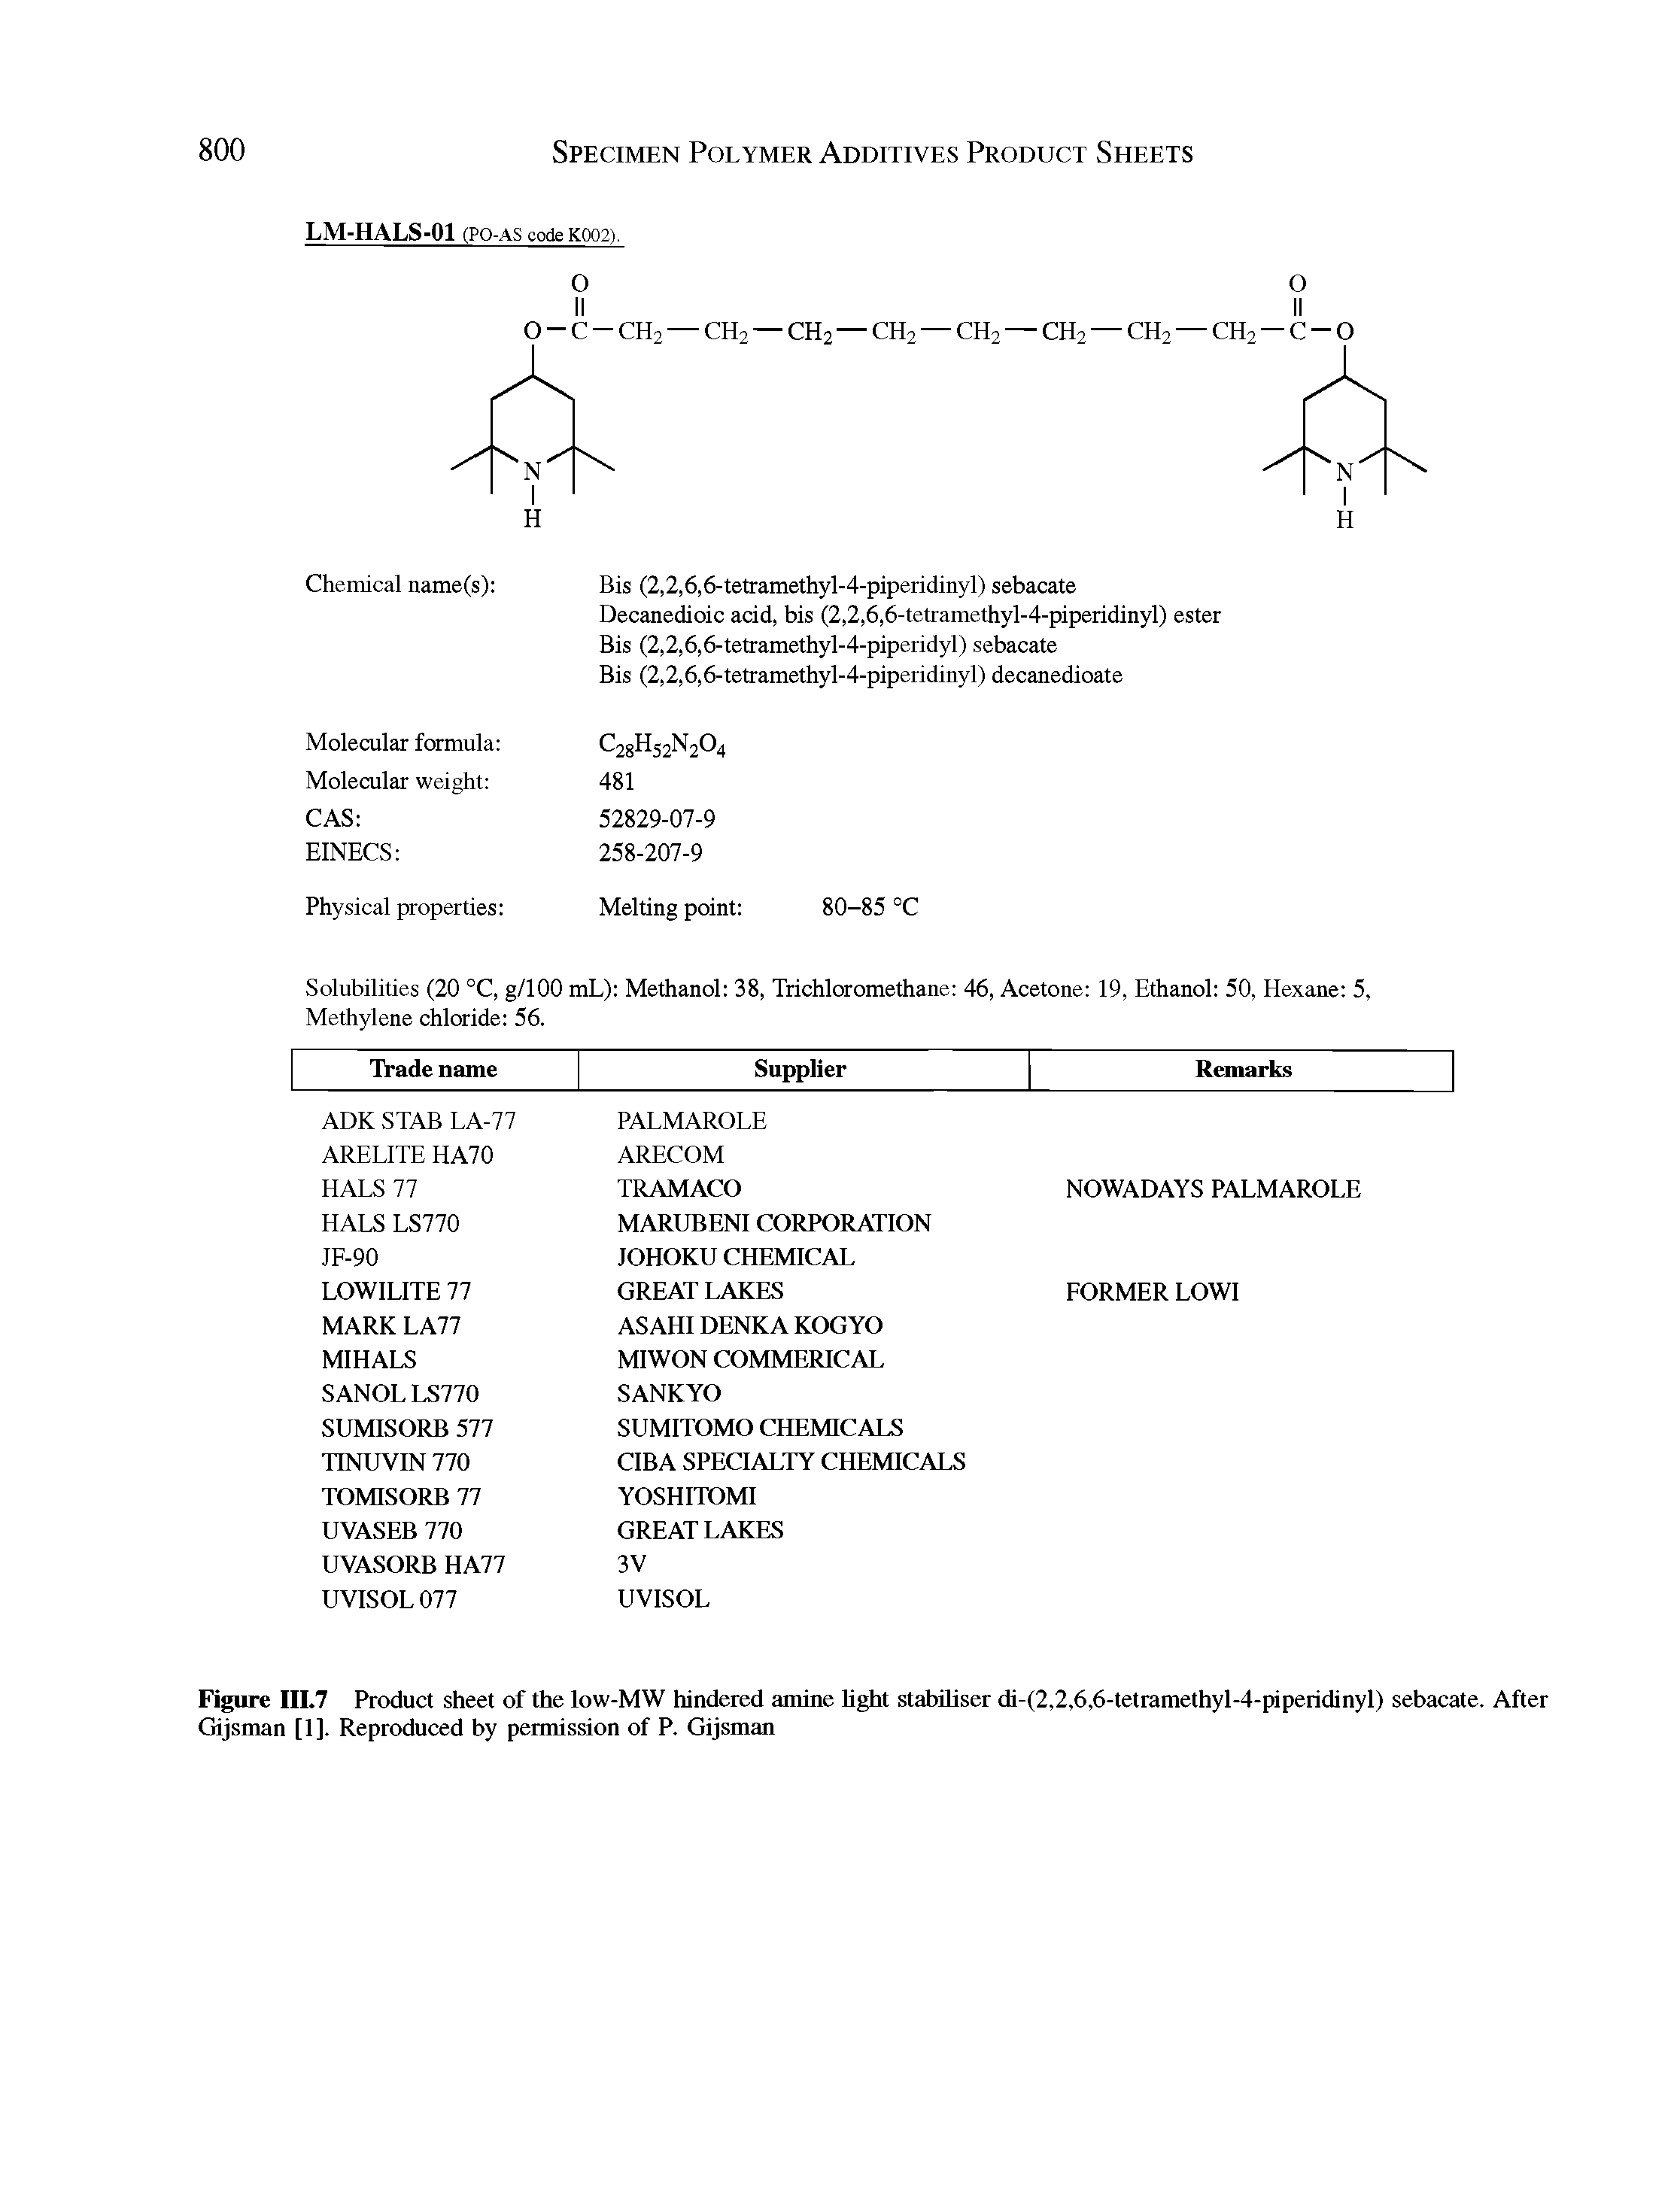 Figure III.7 Product sheet of the low-MW hindered amine light stabiliser di-(2,2,6,6-tetramethyl-4-piperidinyl) sebacate. After Gijsman [1], Reproduced by permission of P. Gijsman...